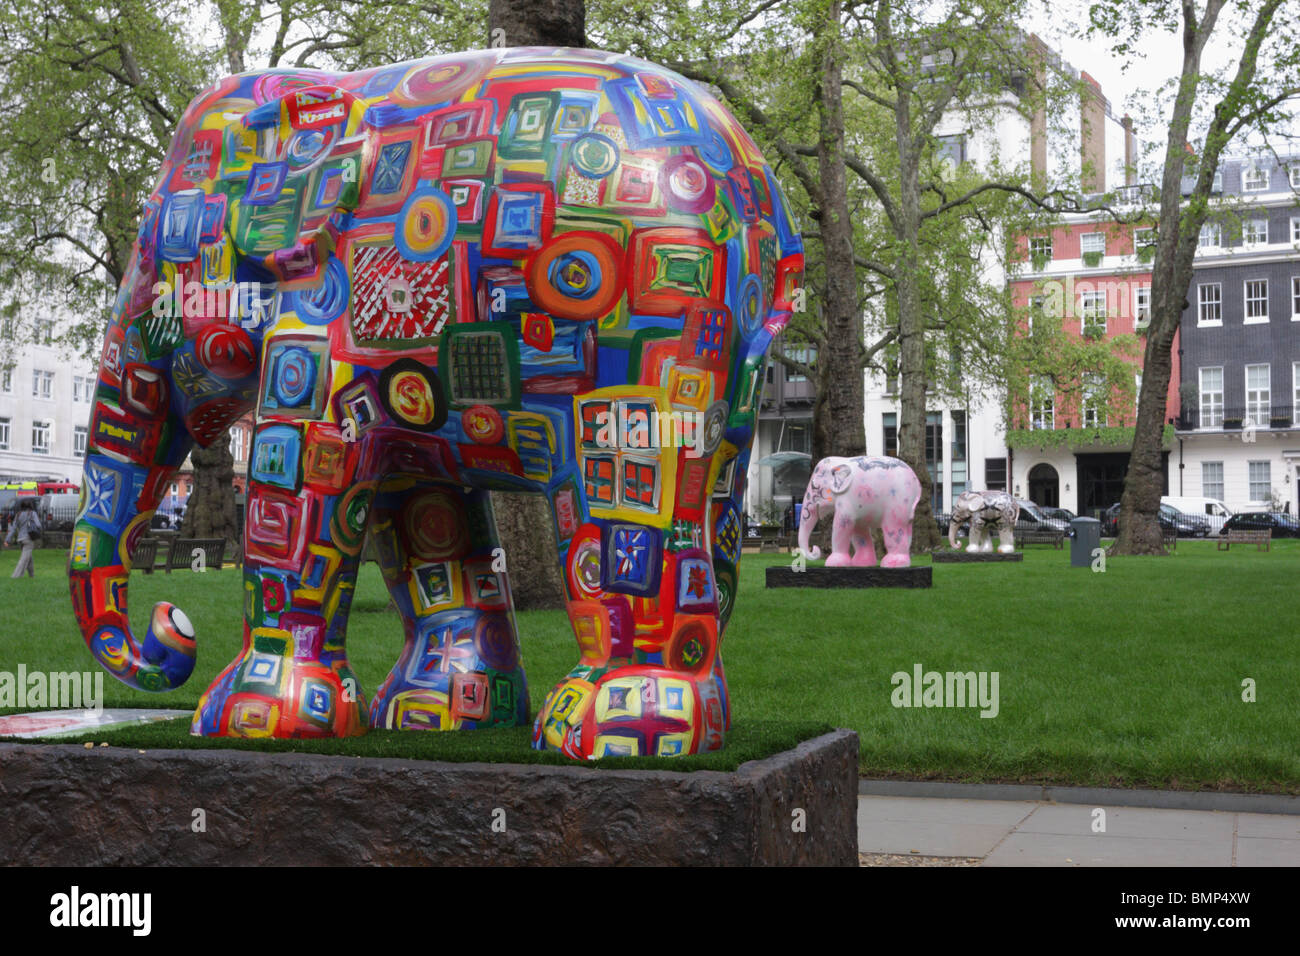 One of (26) images related to Elephant Parade in 2010. The images reveal close-ups also of the artwork upon the elephants in some detail.  Enjoy. Stock Photo